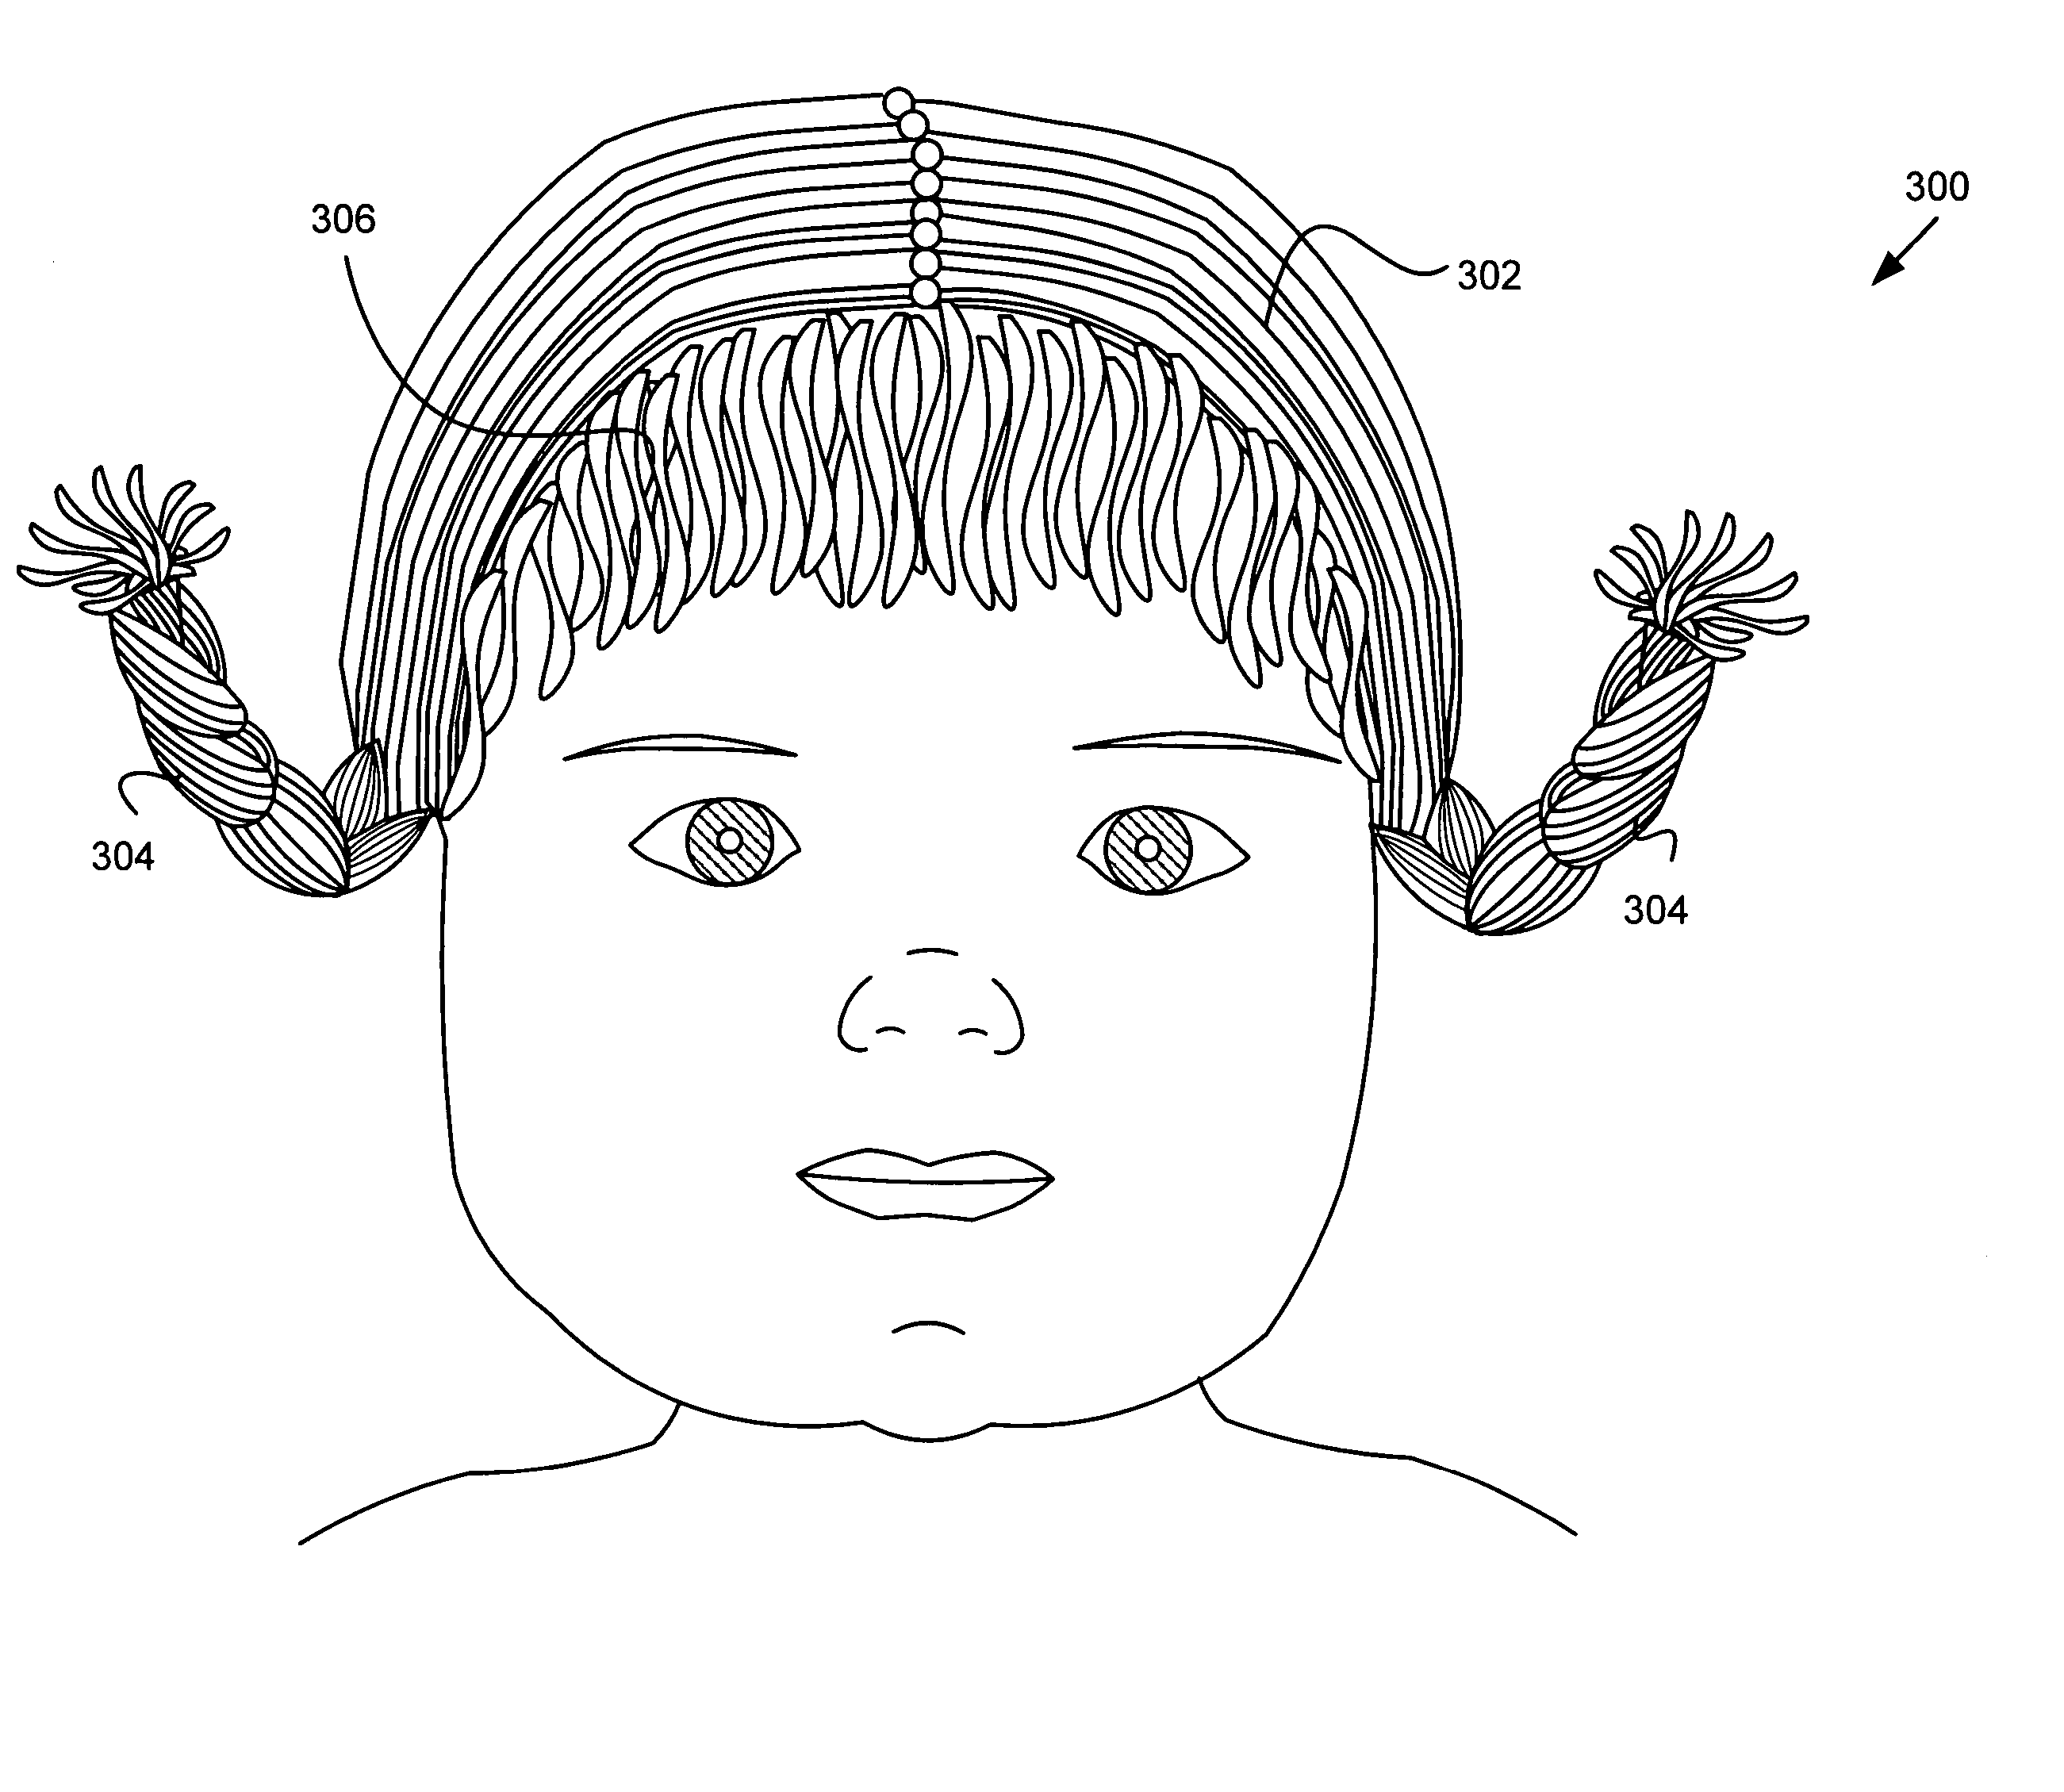 Apparatus, system, and method for making a decorative hat